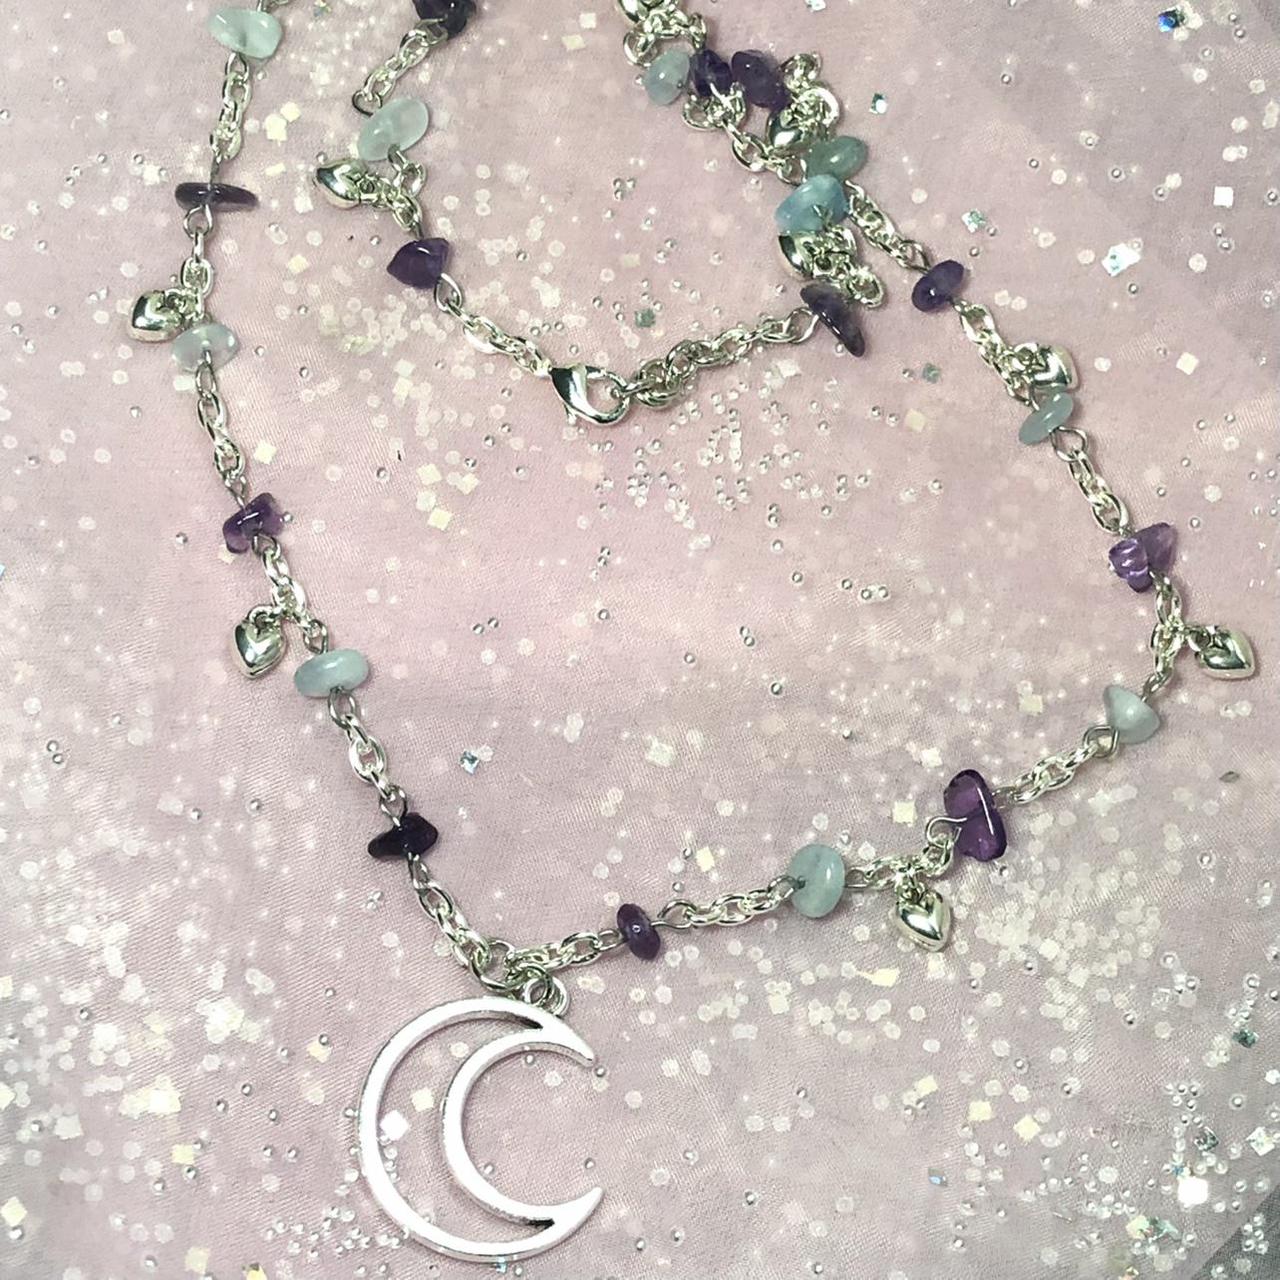 Product Image 1 - crescent moon crystal necklace! 🌙⭐️
the